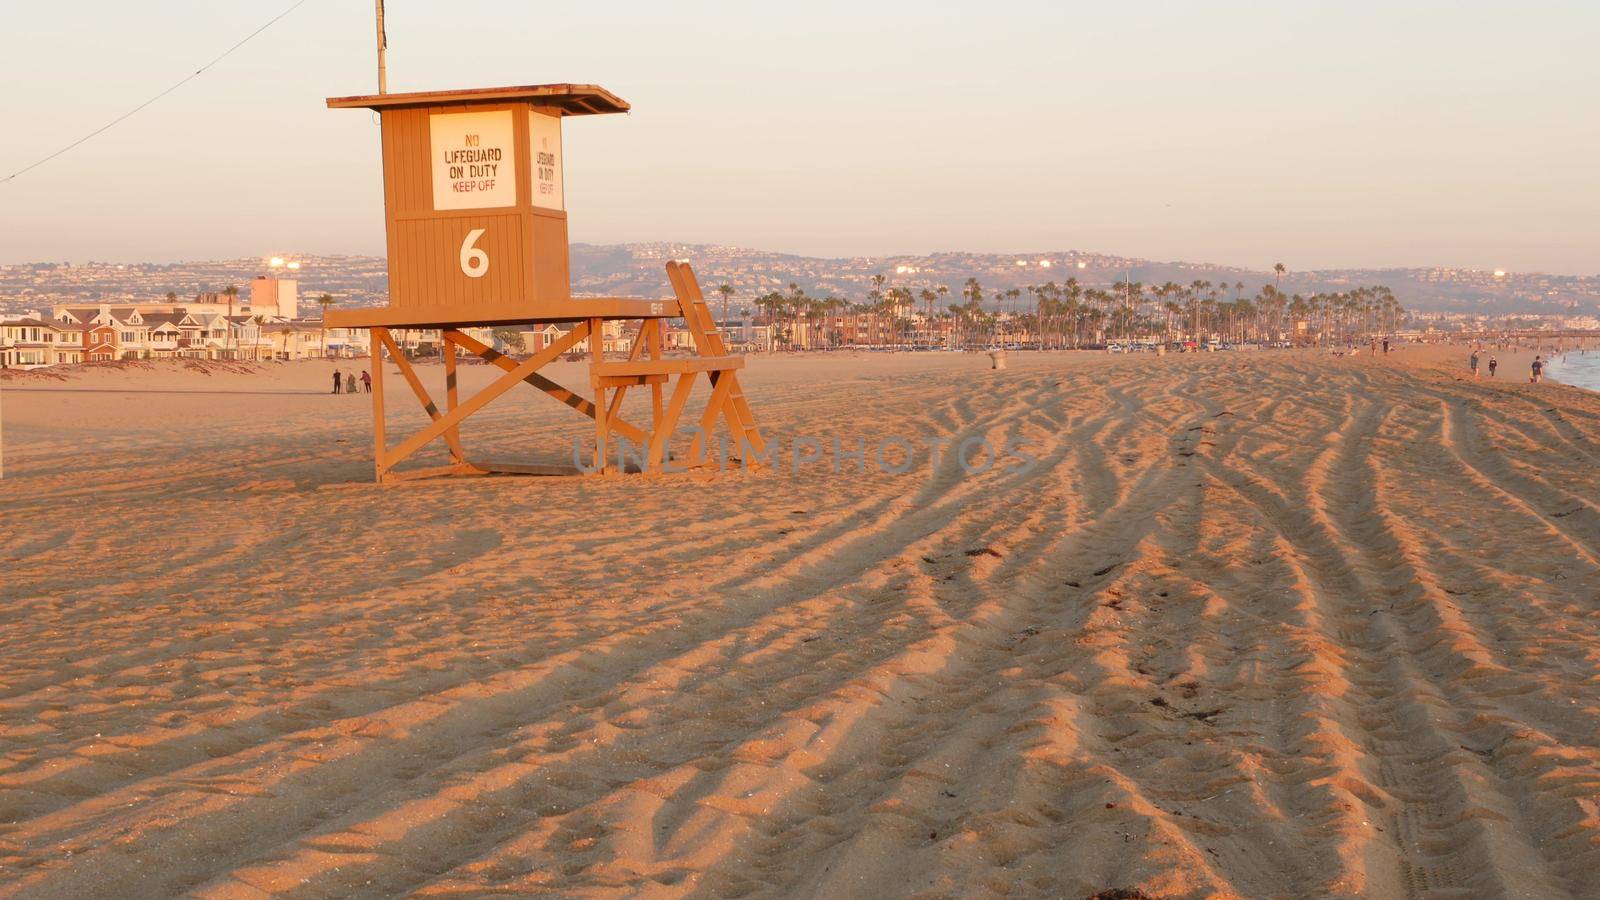 Iconic retro wooden orange lifeguard watch tower on sandy california pacific ocean beach illuminated by sunset rays. Private holiday houses and mountains on horizon. Newport resort aesthetic, USA by DogoraSun